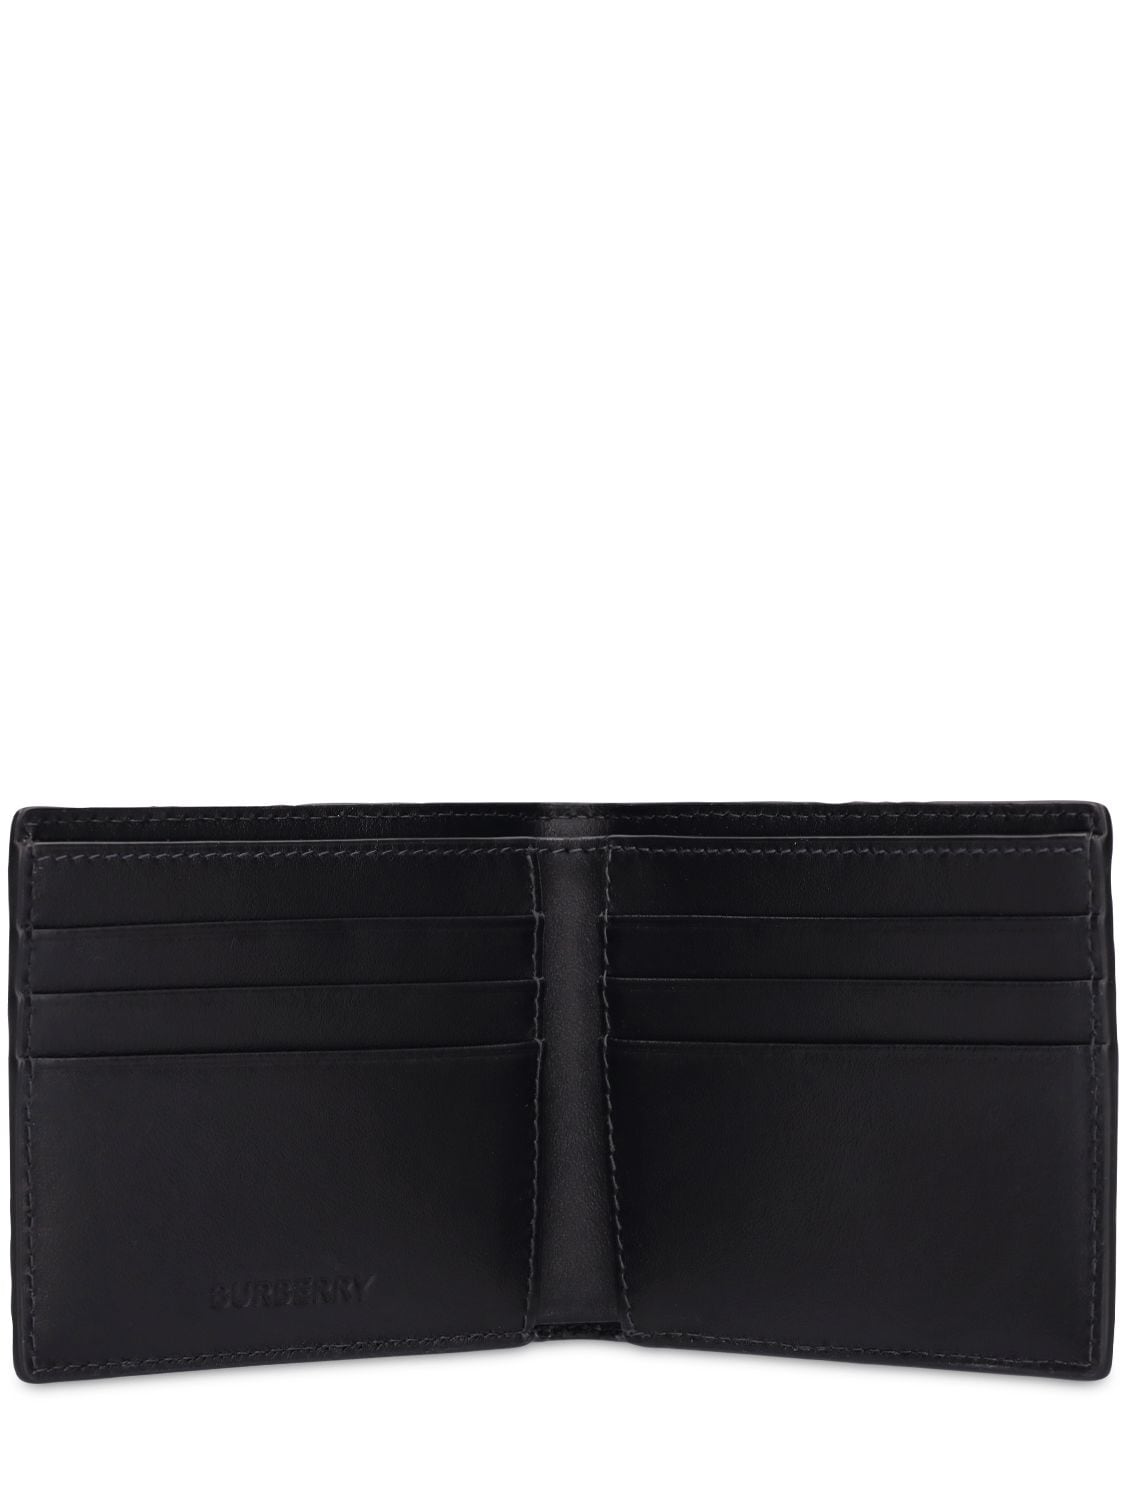 Shop Burberry Check E-canvas Billfold Wallet In Charcoal